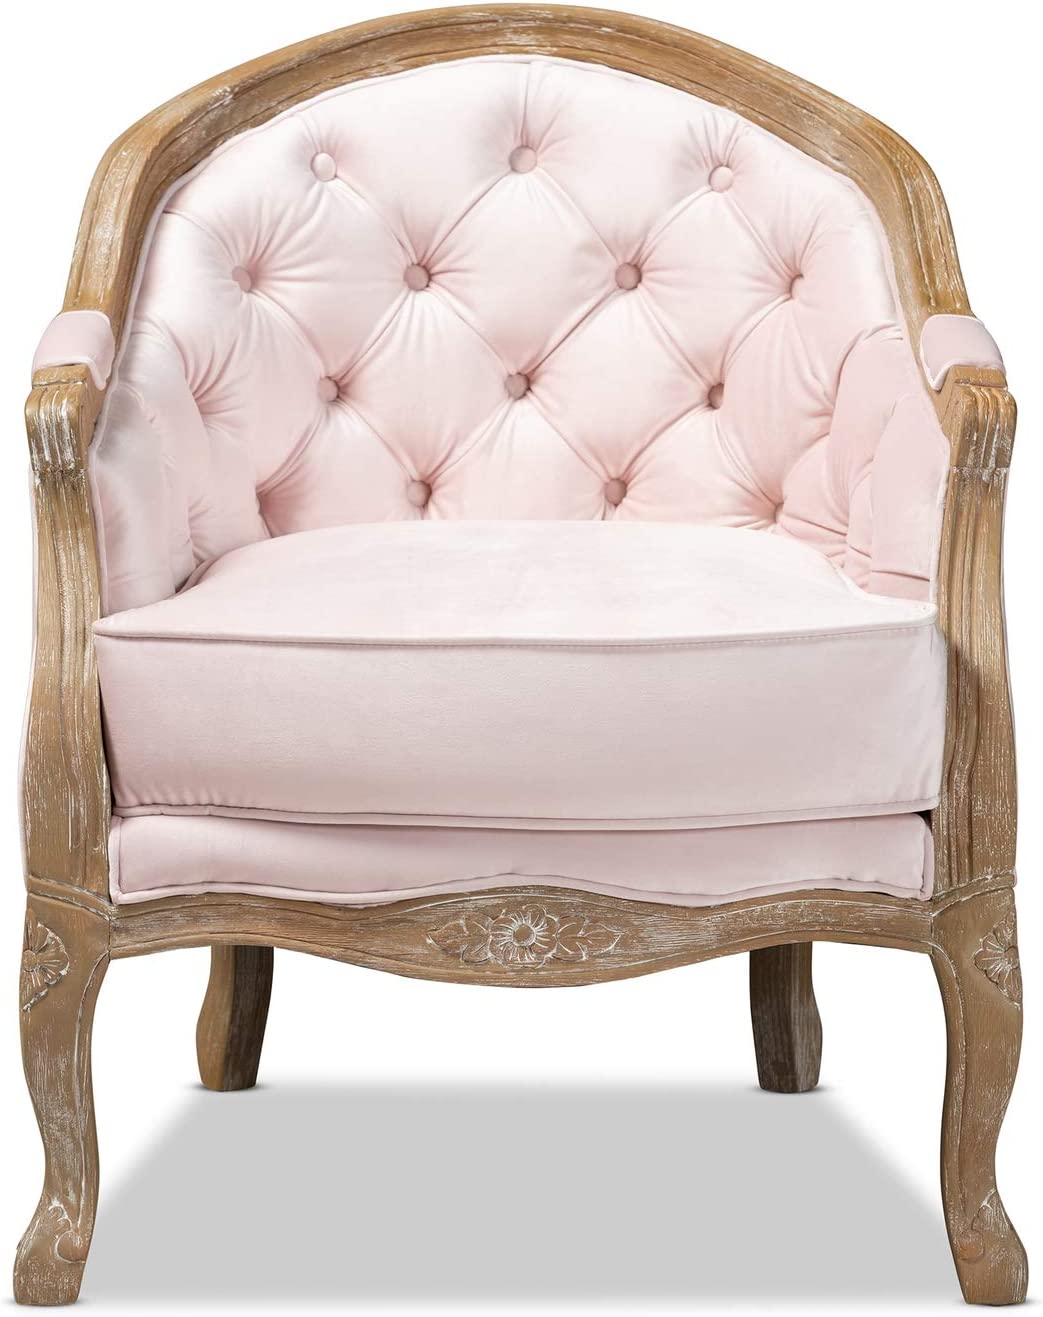 Baxton Studio Genevieve Traditional French Provincial Light Pink Velvet Upholstered White-Washed Oak Wood Armchair